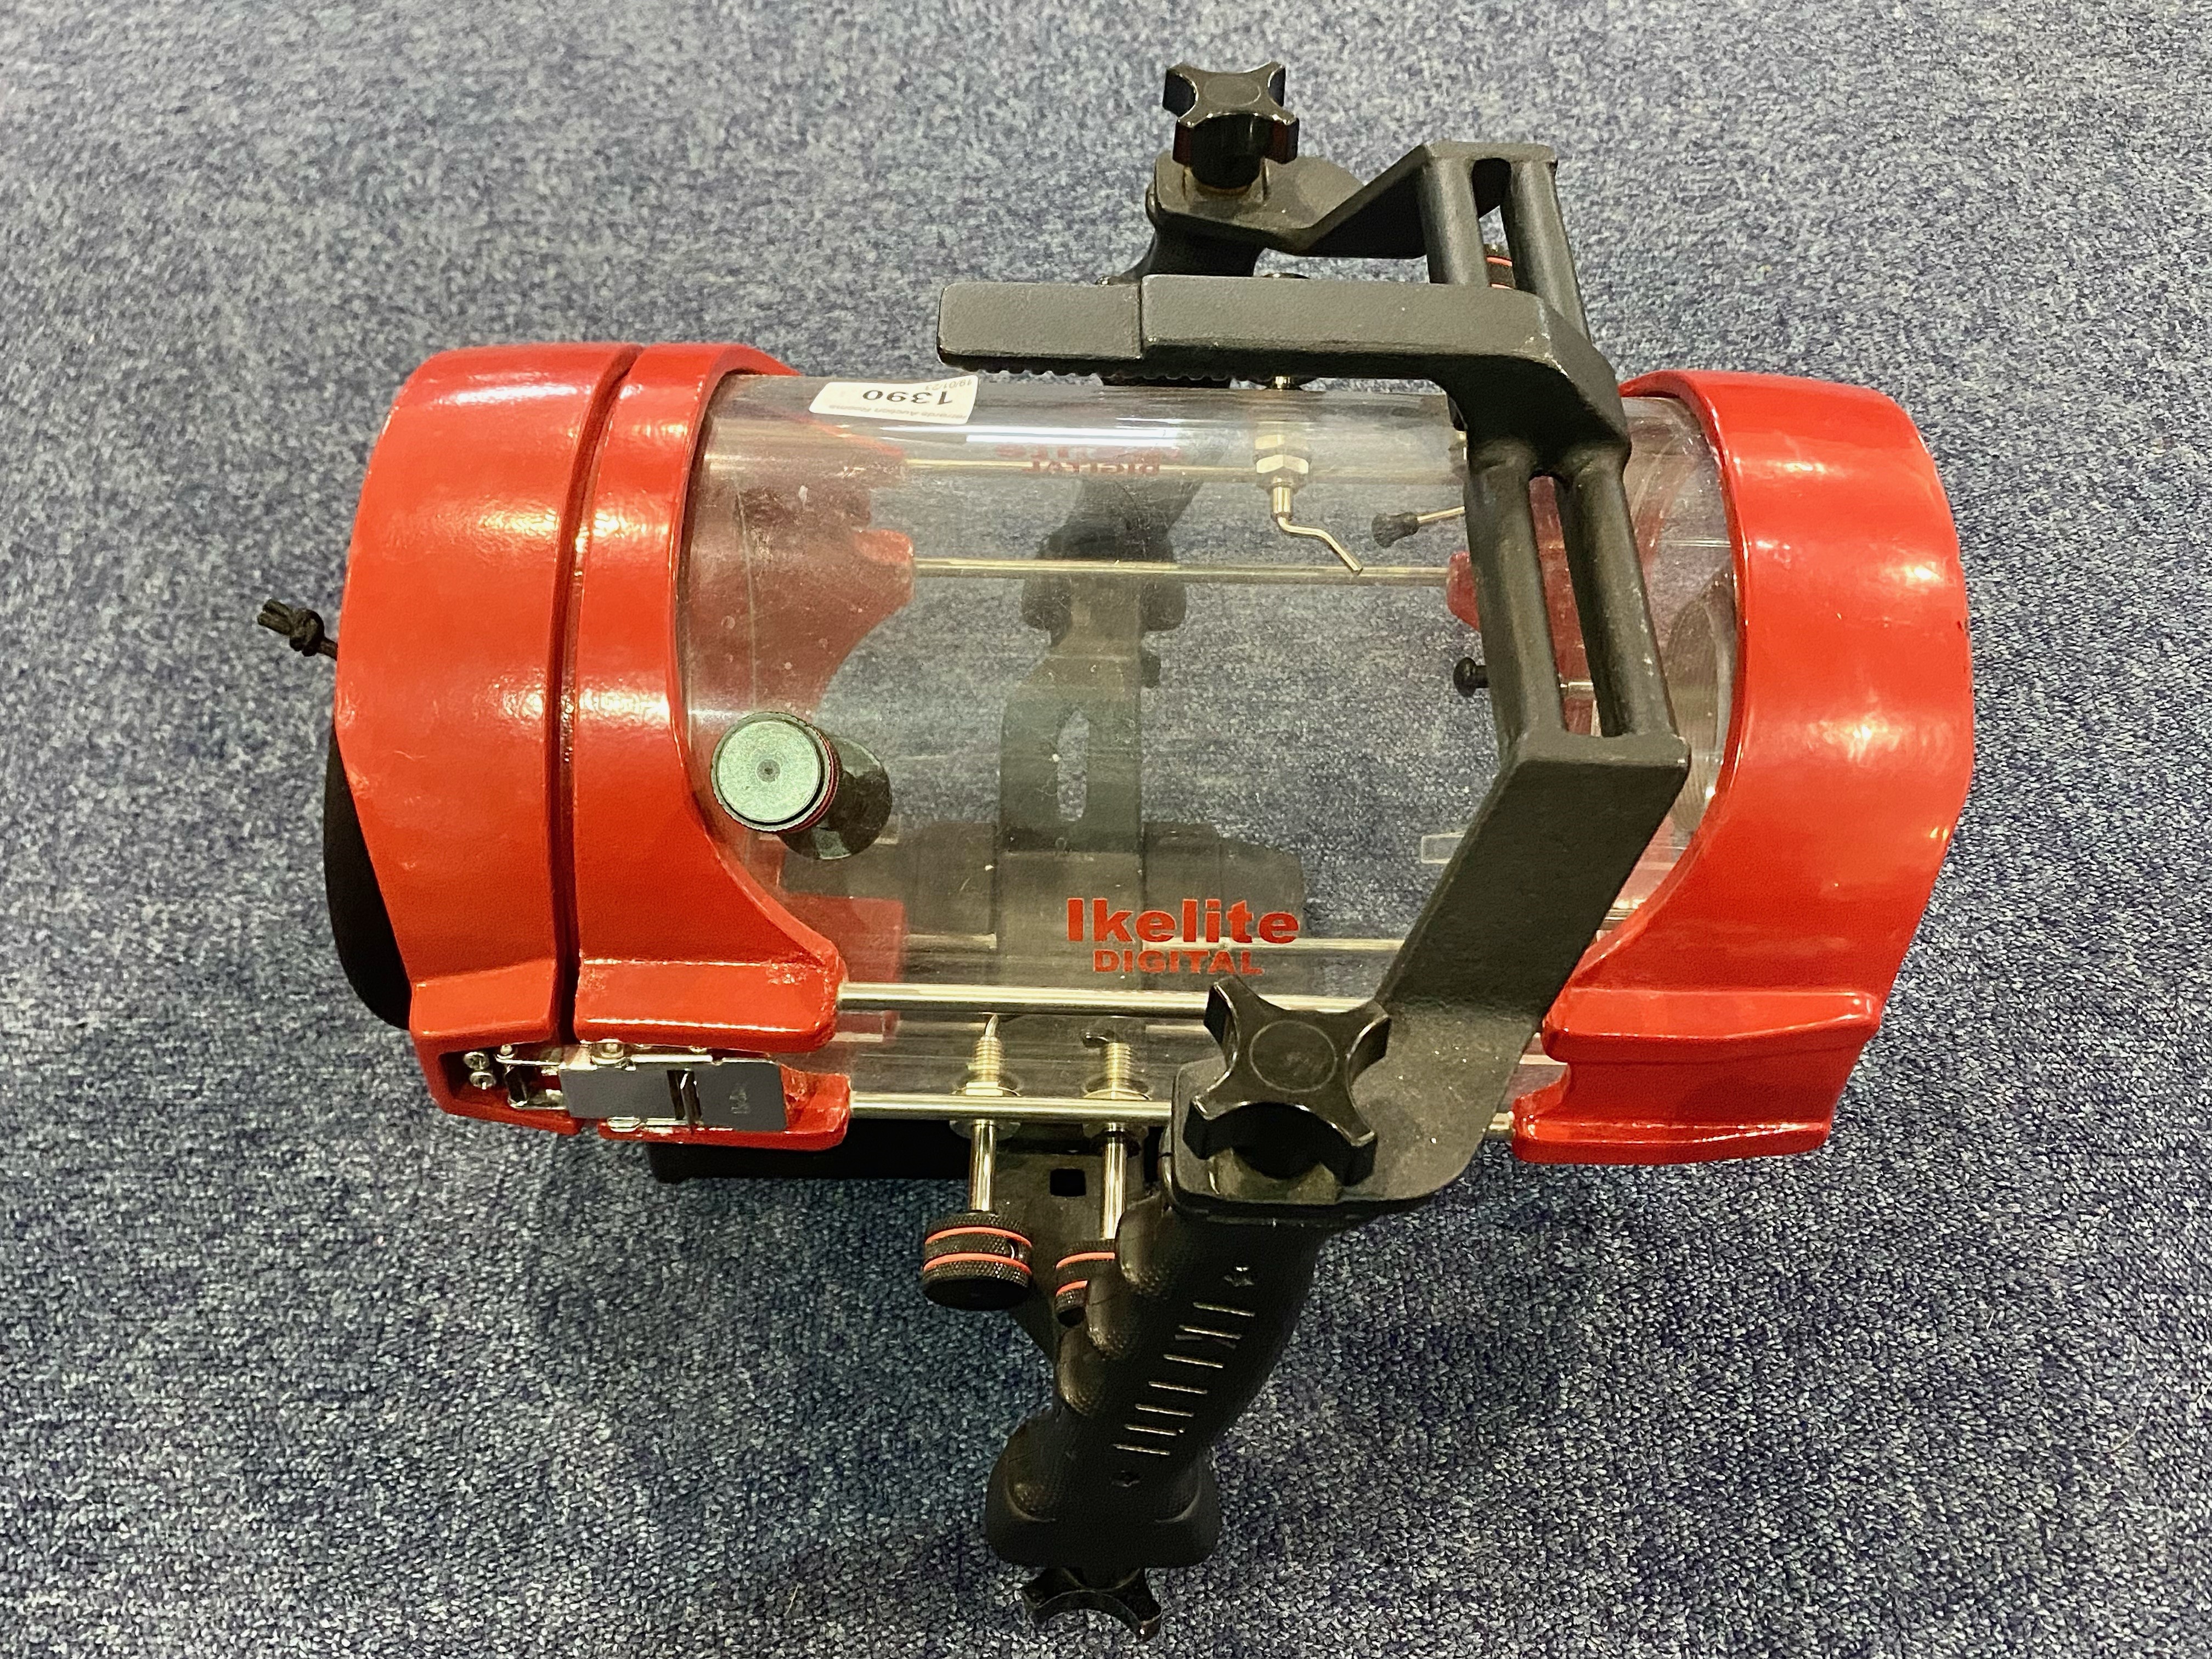 Deep Sea Divers Camera Holder, red, length approx 14.5". - Image 3 of 4